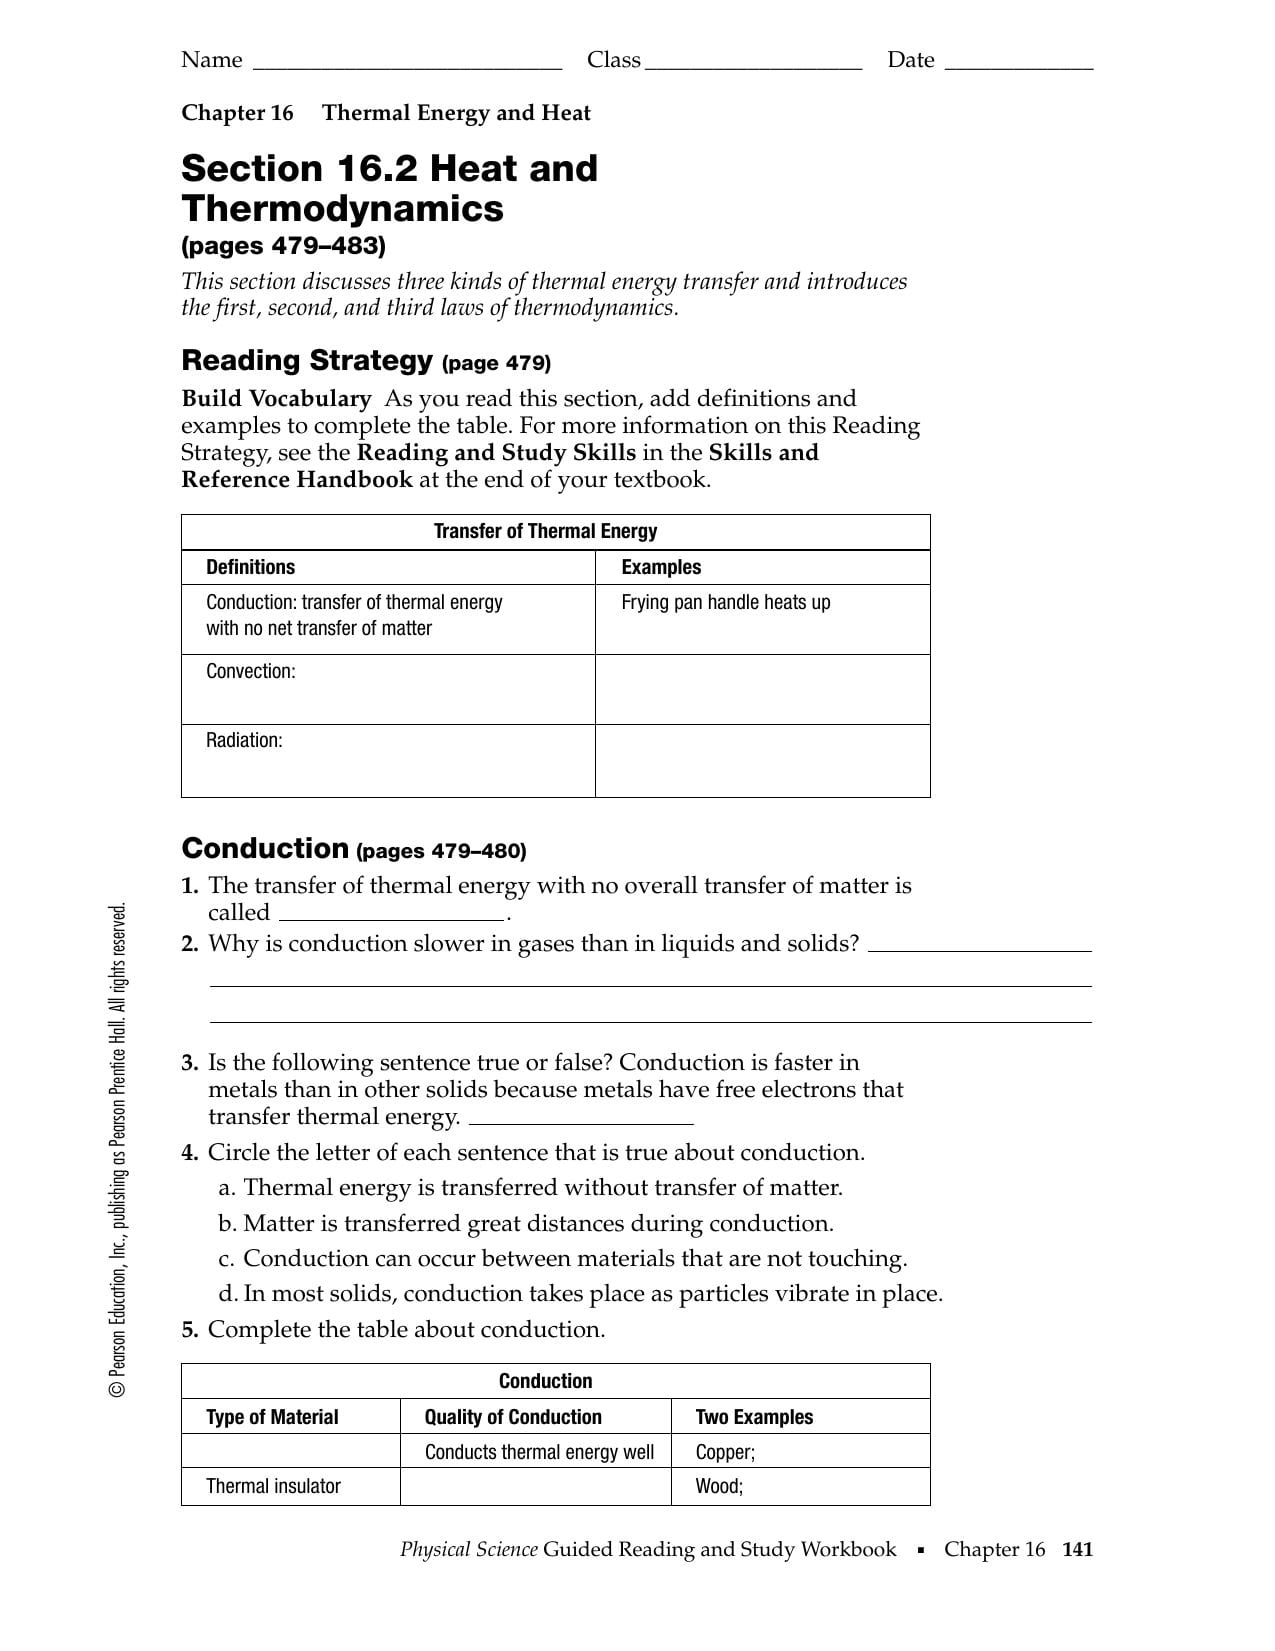 section-16-2-heat-and-thermodynamics-worksheet-answer-key-db-excel